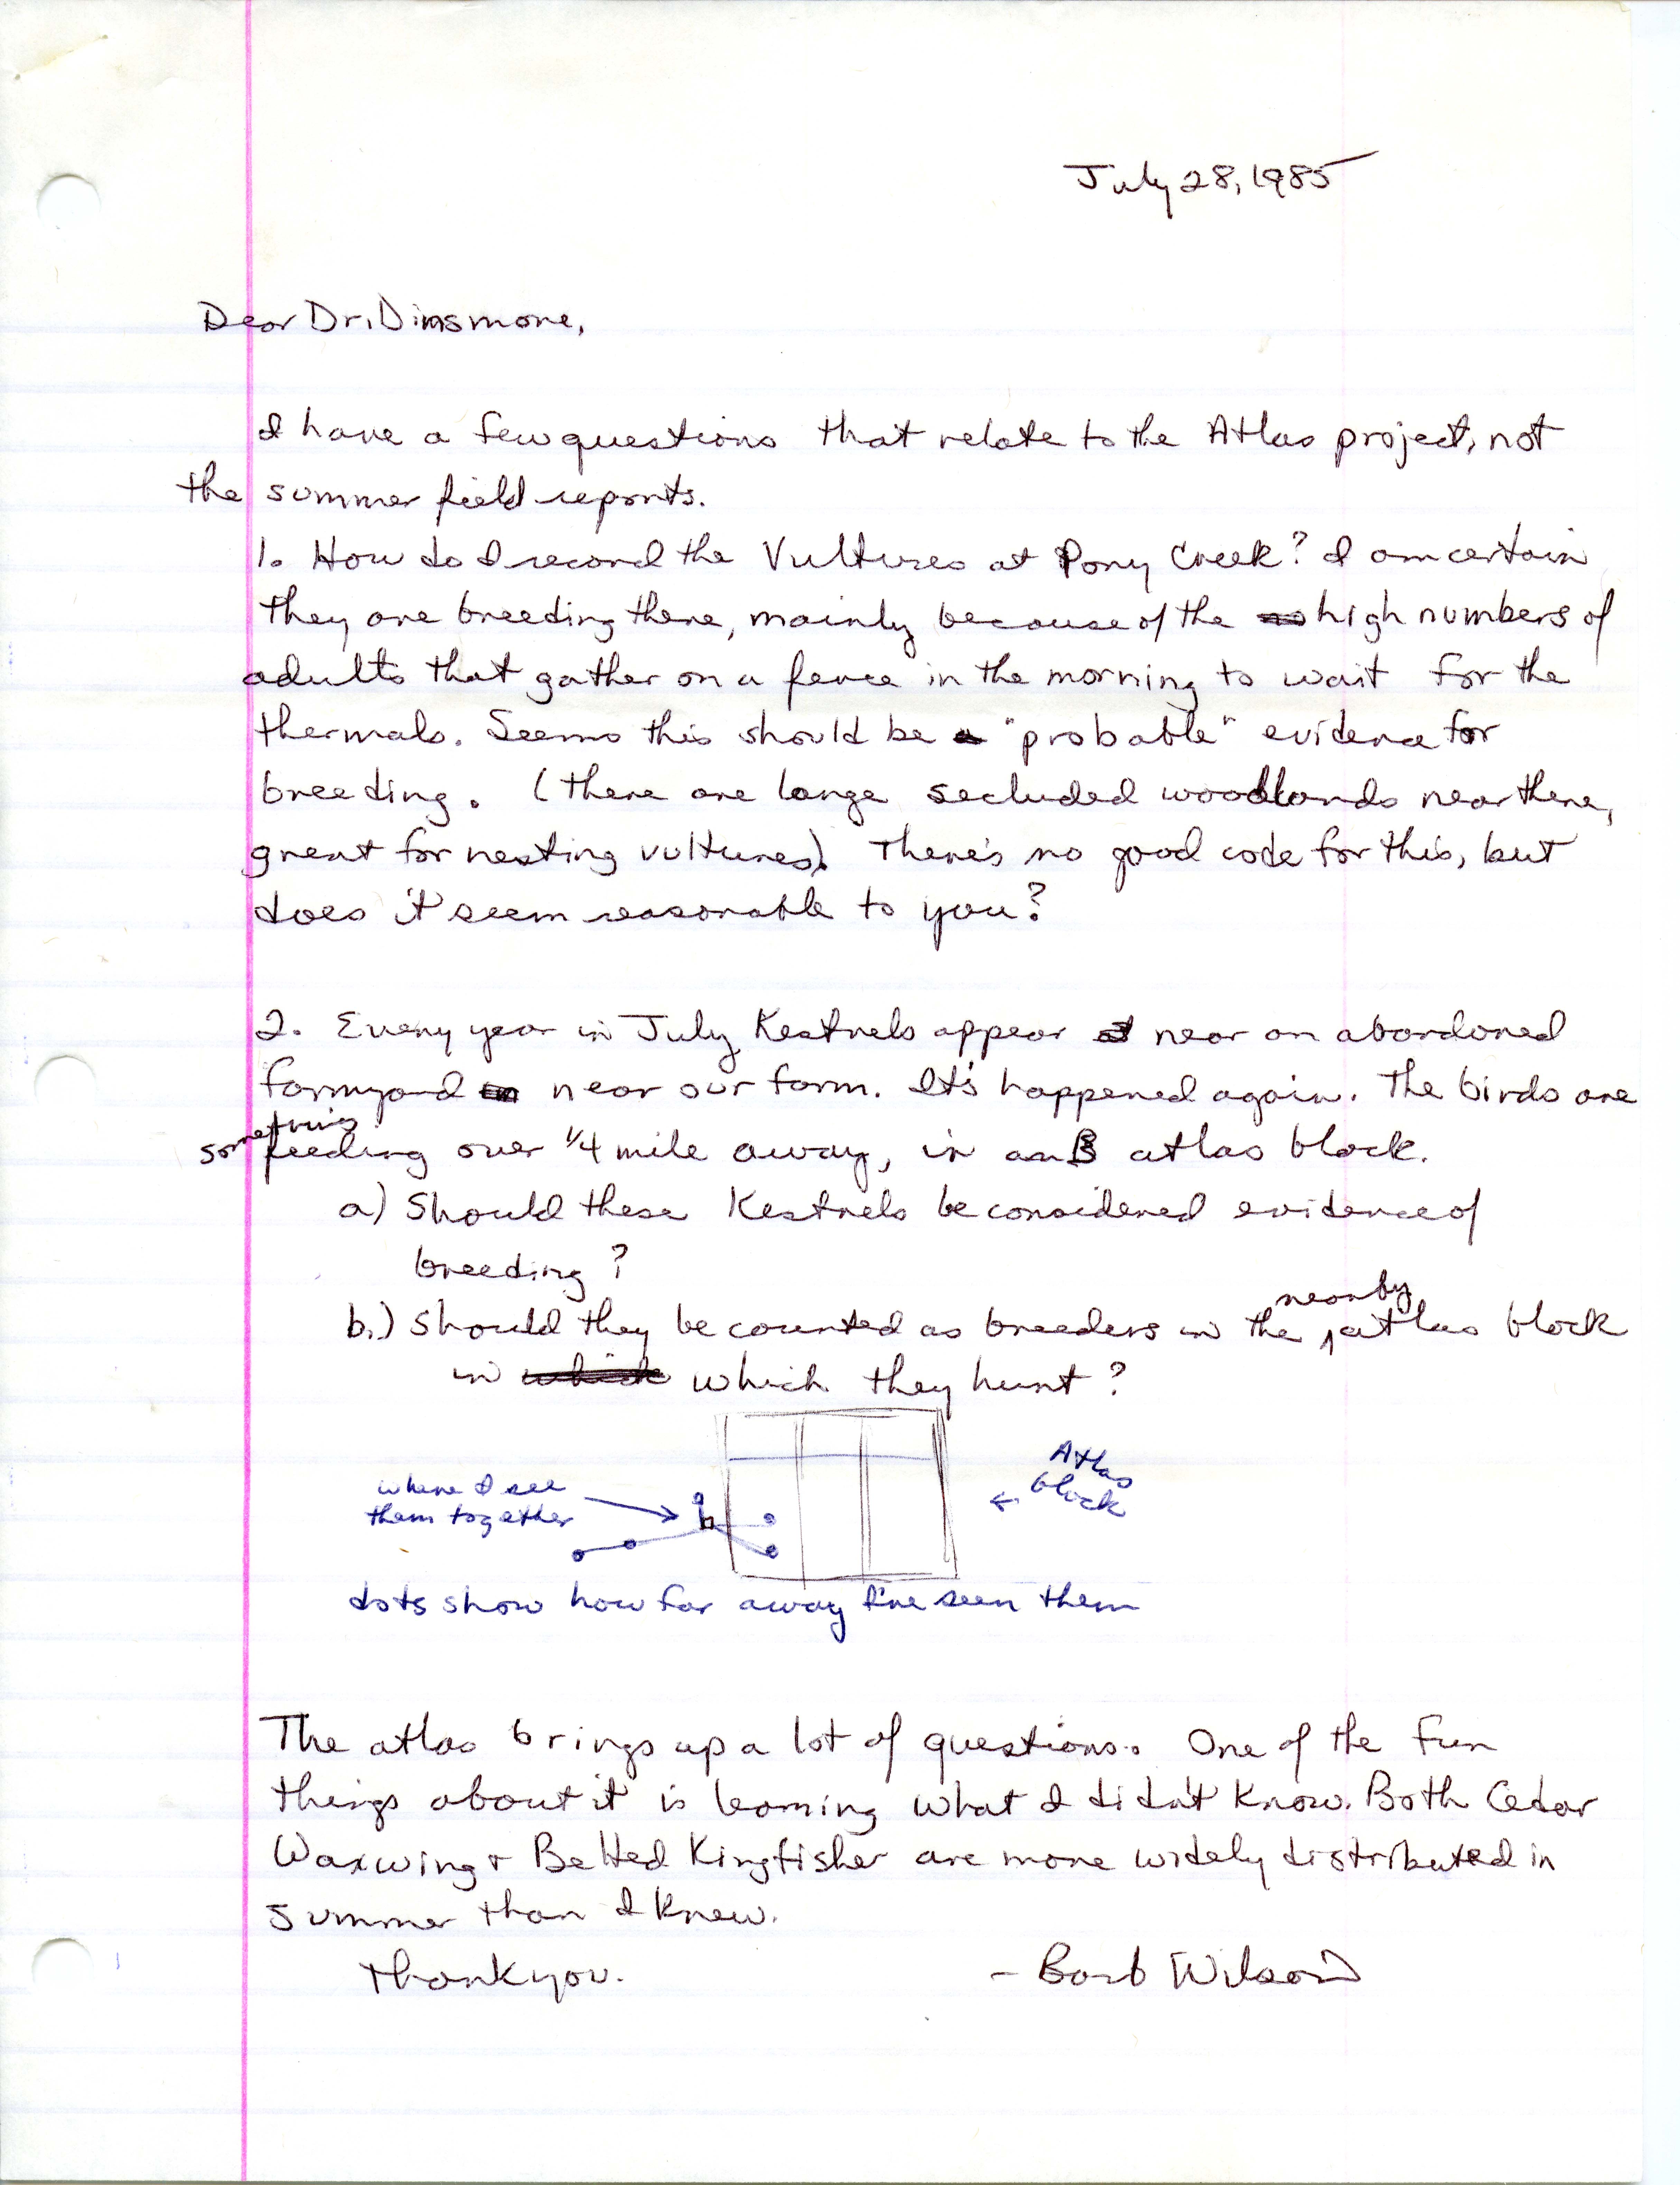 Field notes and Barbara L. Wilson letter to James J. Dinsmore, July 28, 1985